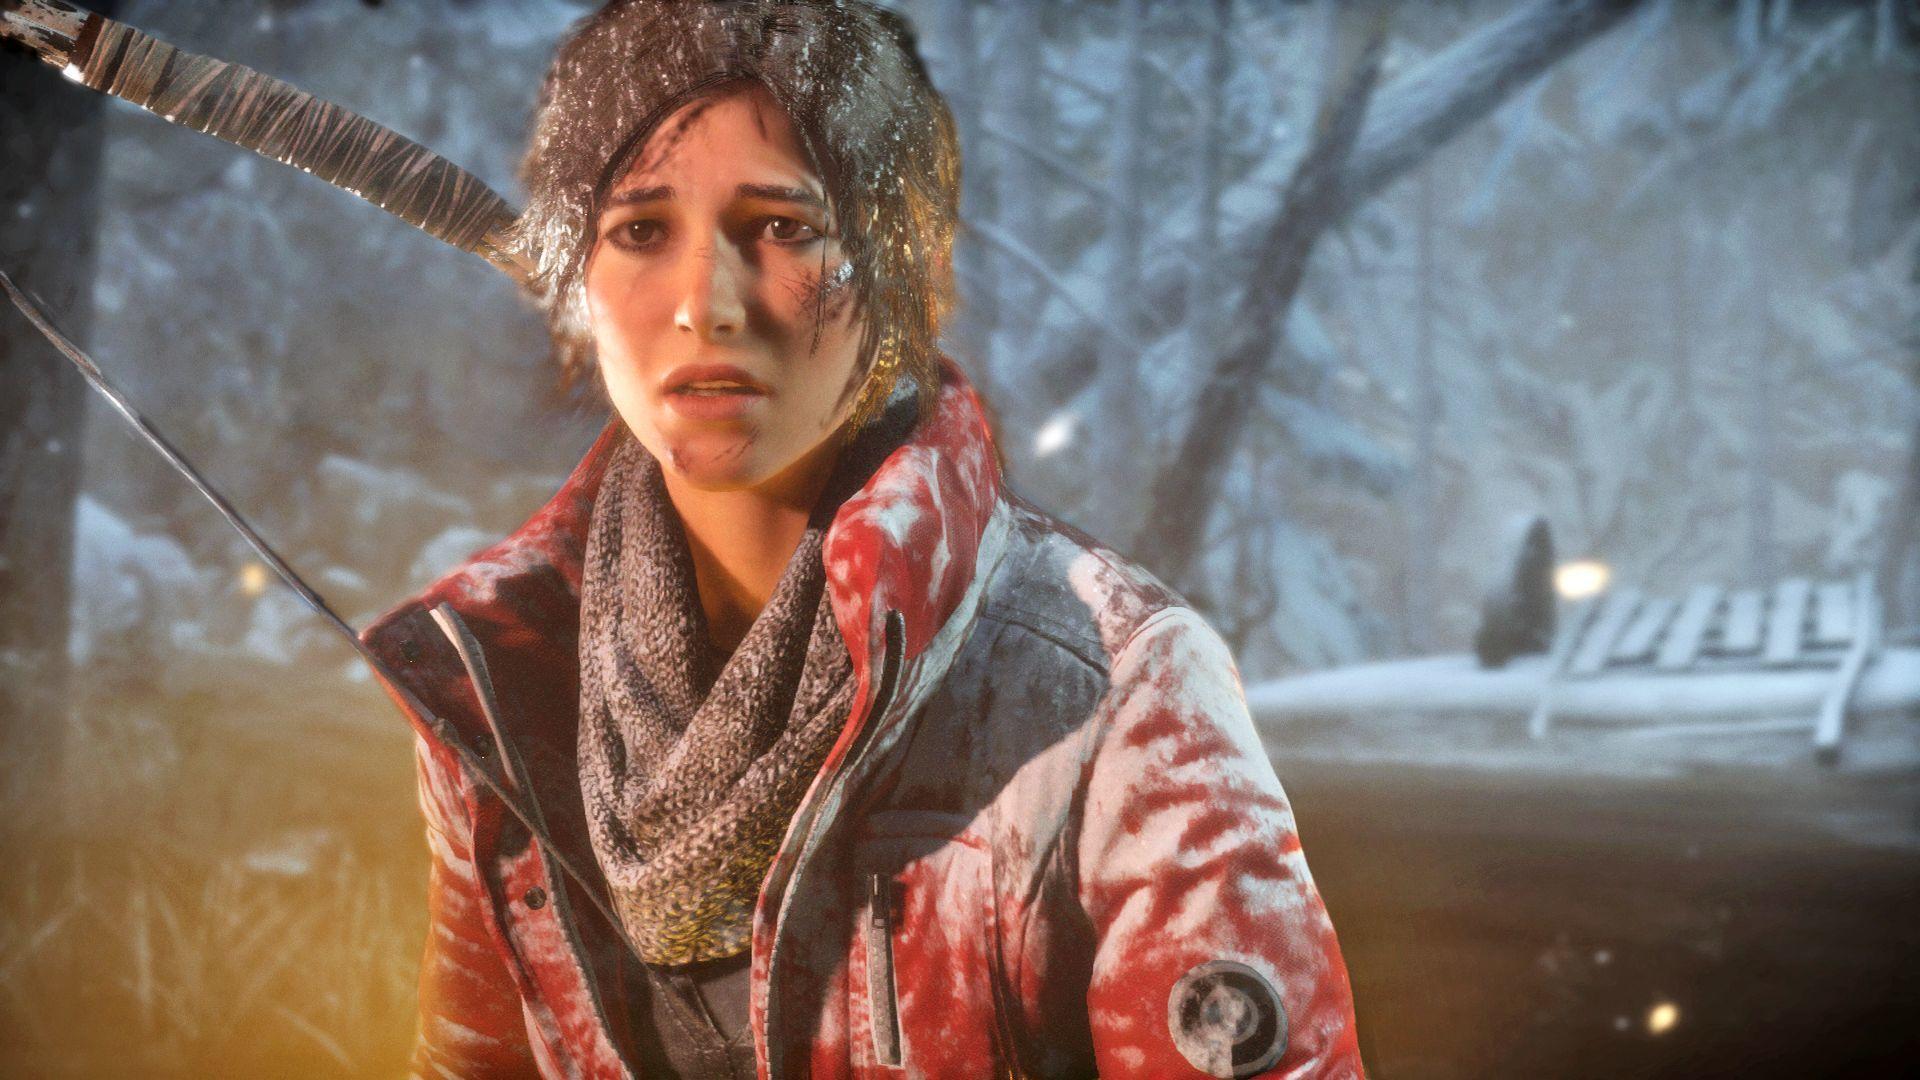 Download Wallpapers 1920x1080 Rise of the tomb raider, Square enix